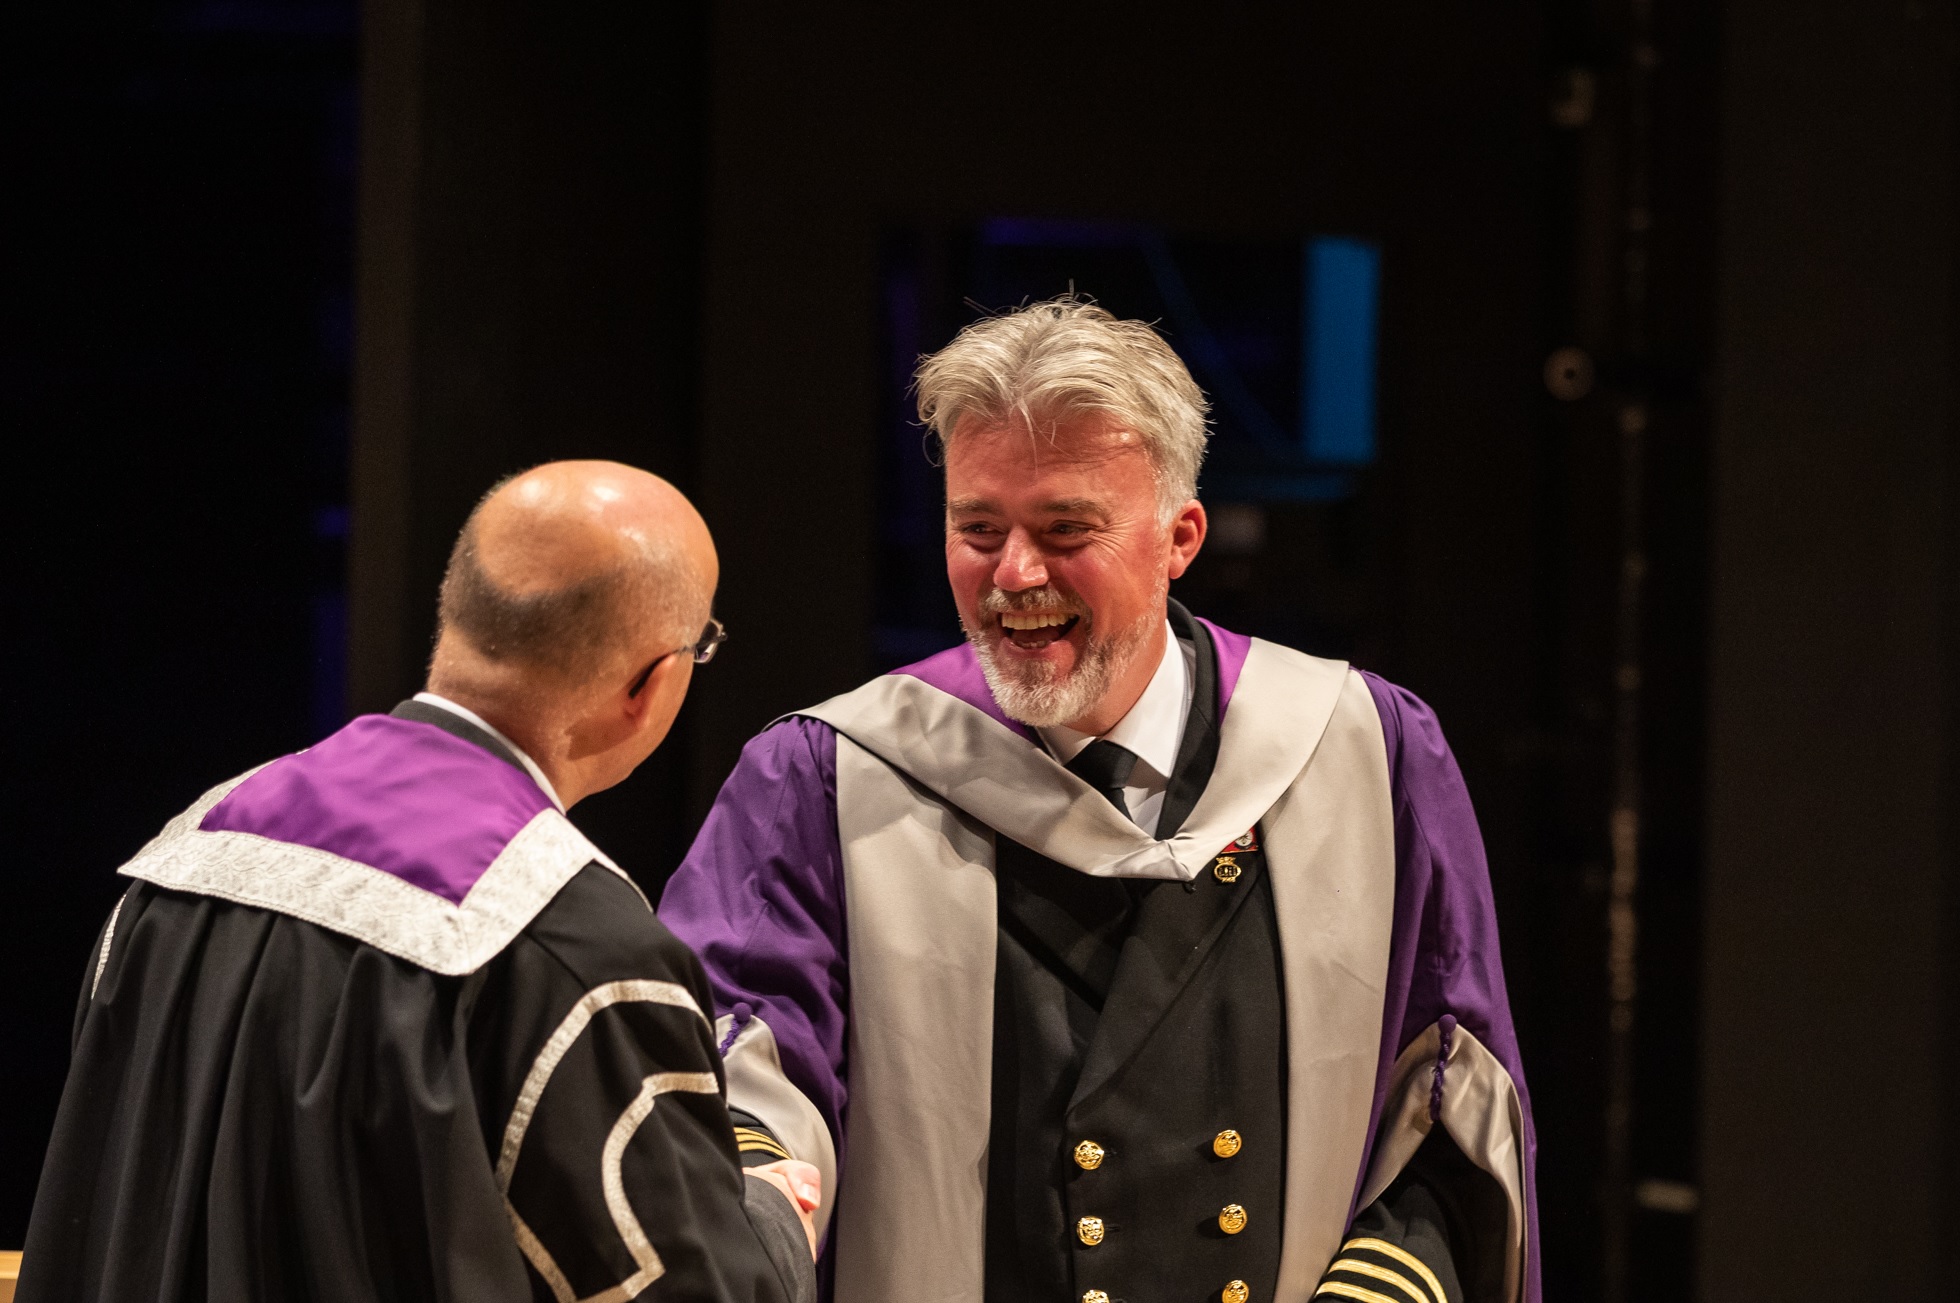 Captain Iain Macneil presented with an Honorary Doctorate for services to education in the maritime sector by Professor Neil Simco of UHI.